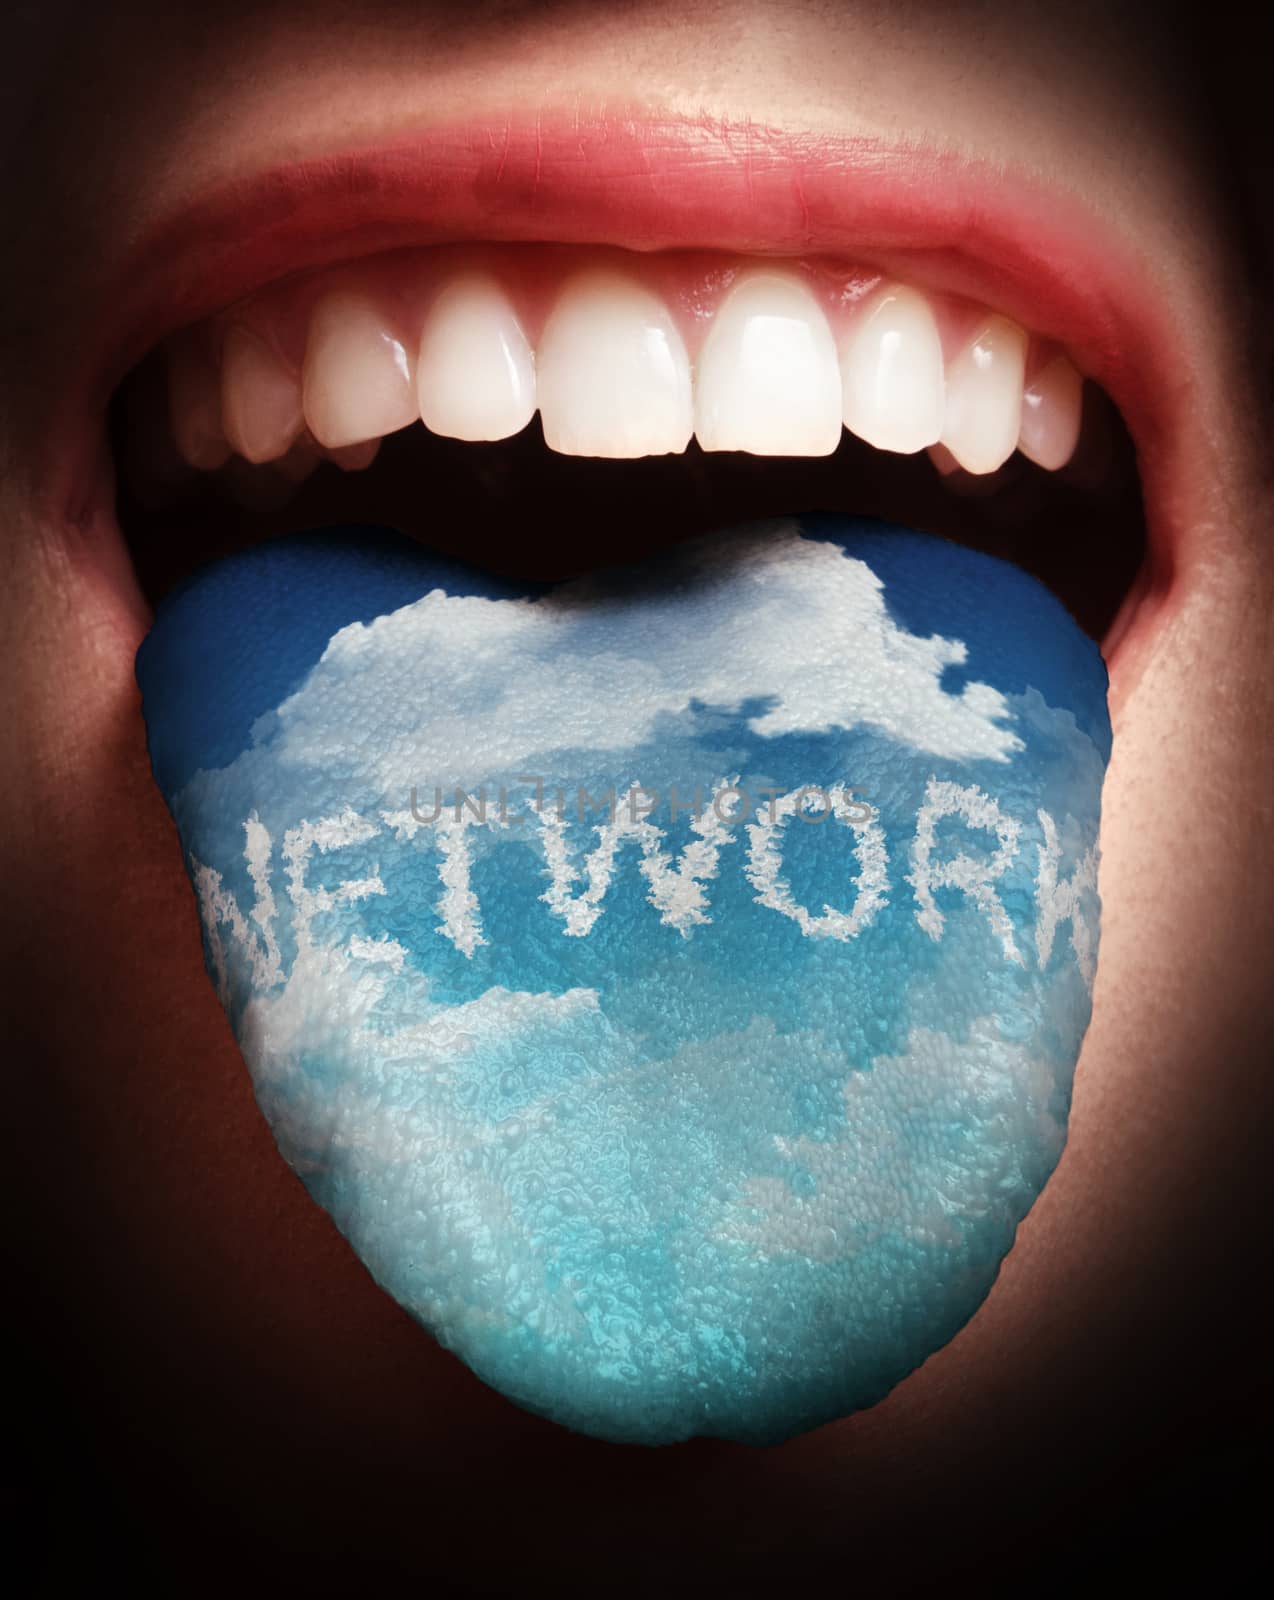 woman with open mouth spreading tongue colored in cloud networki by everythingpossible